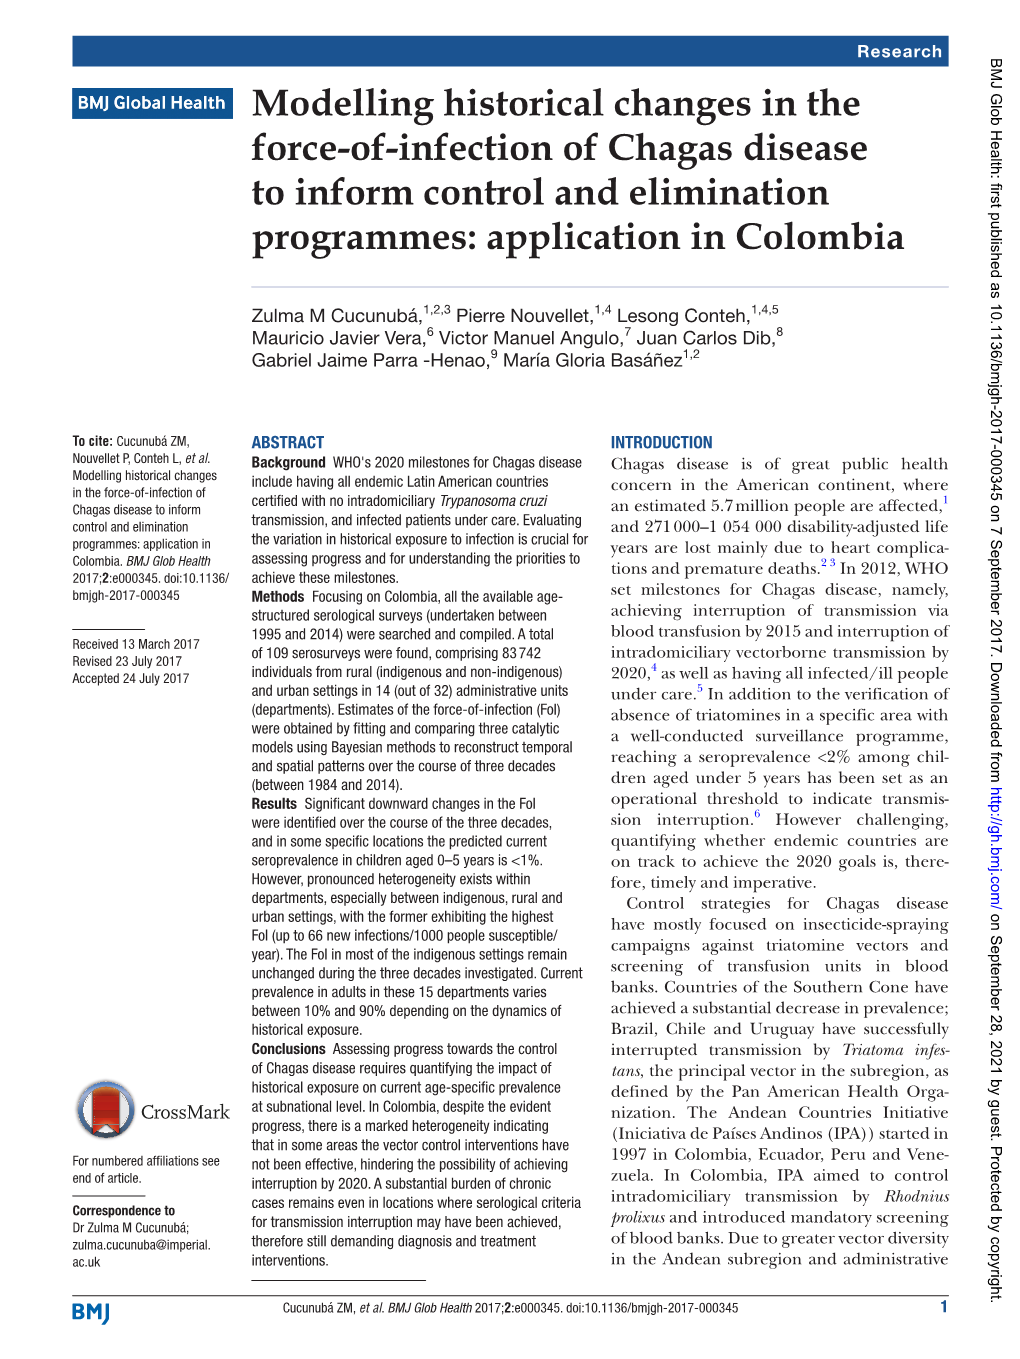 Modelling Historical Changes in the Force-Of-Infection of Chagas Disease to Inform Control and Elimination Programmes: Application in Colombia